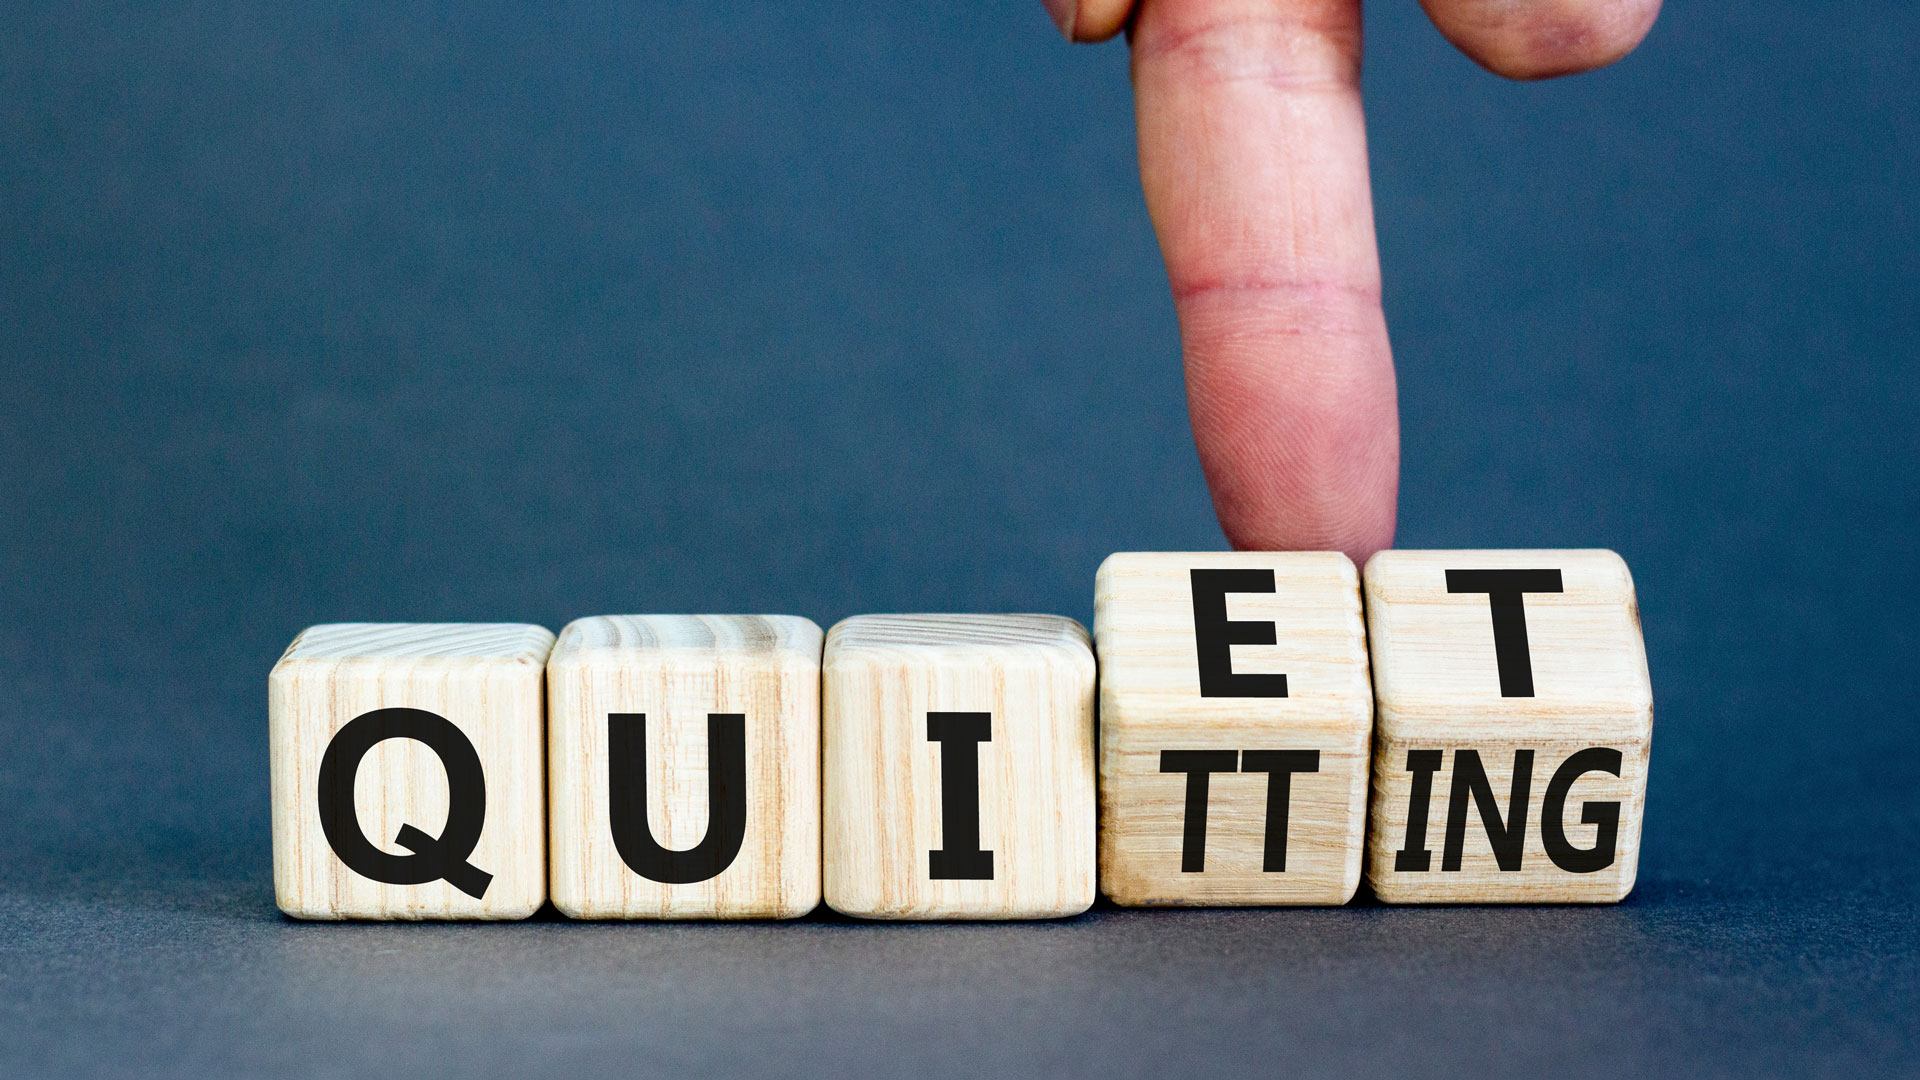 Agile – an antidote to quiet quitting